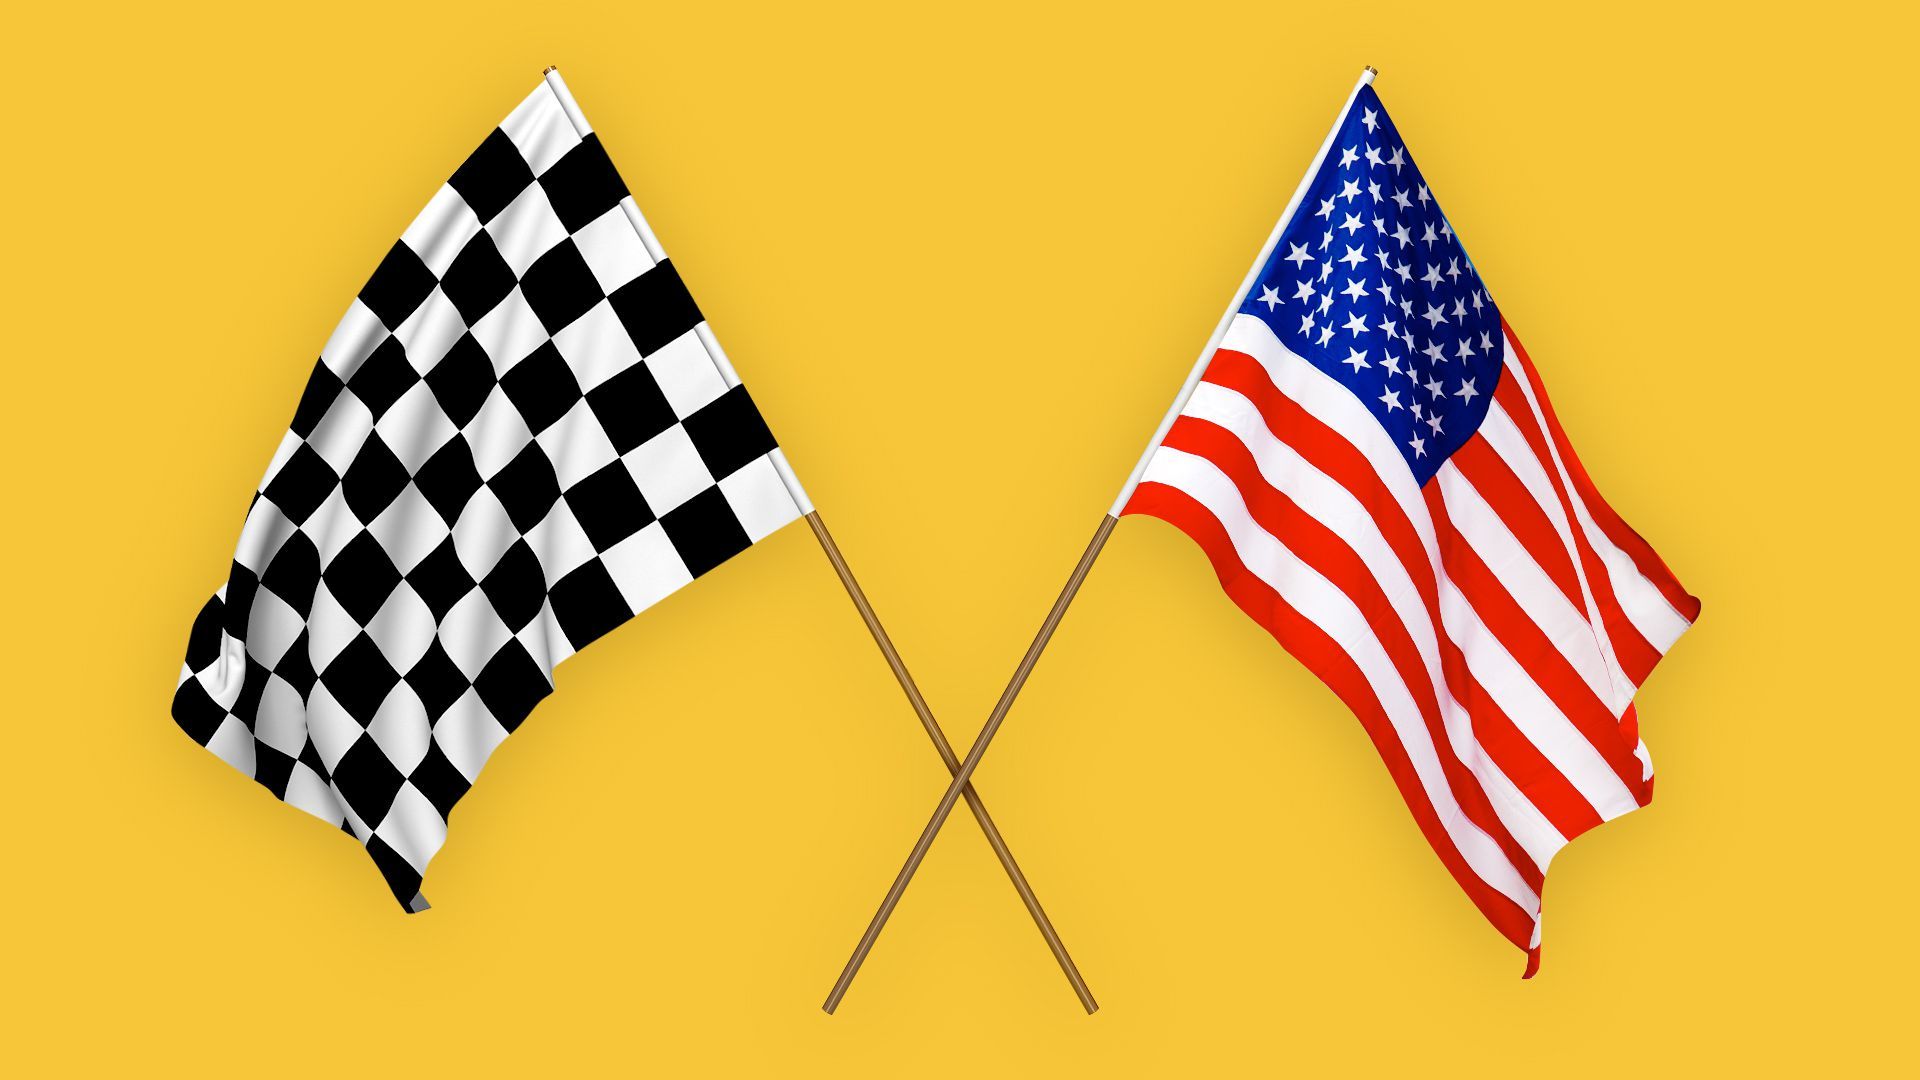 Illustration of crossed racing flags and an American flag